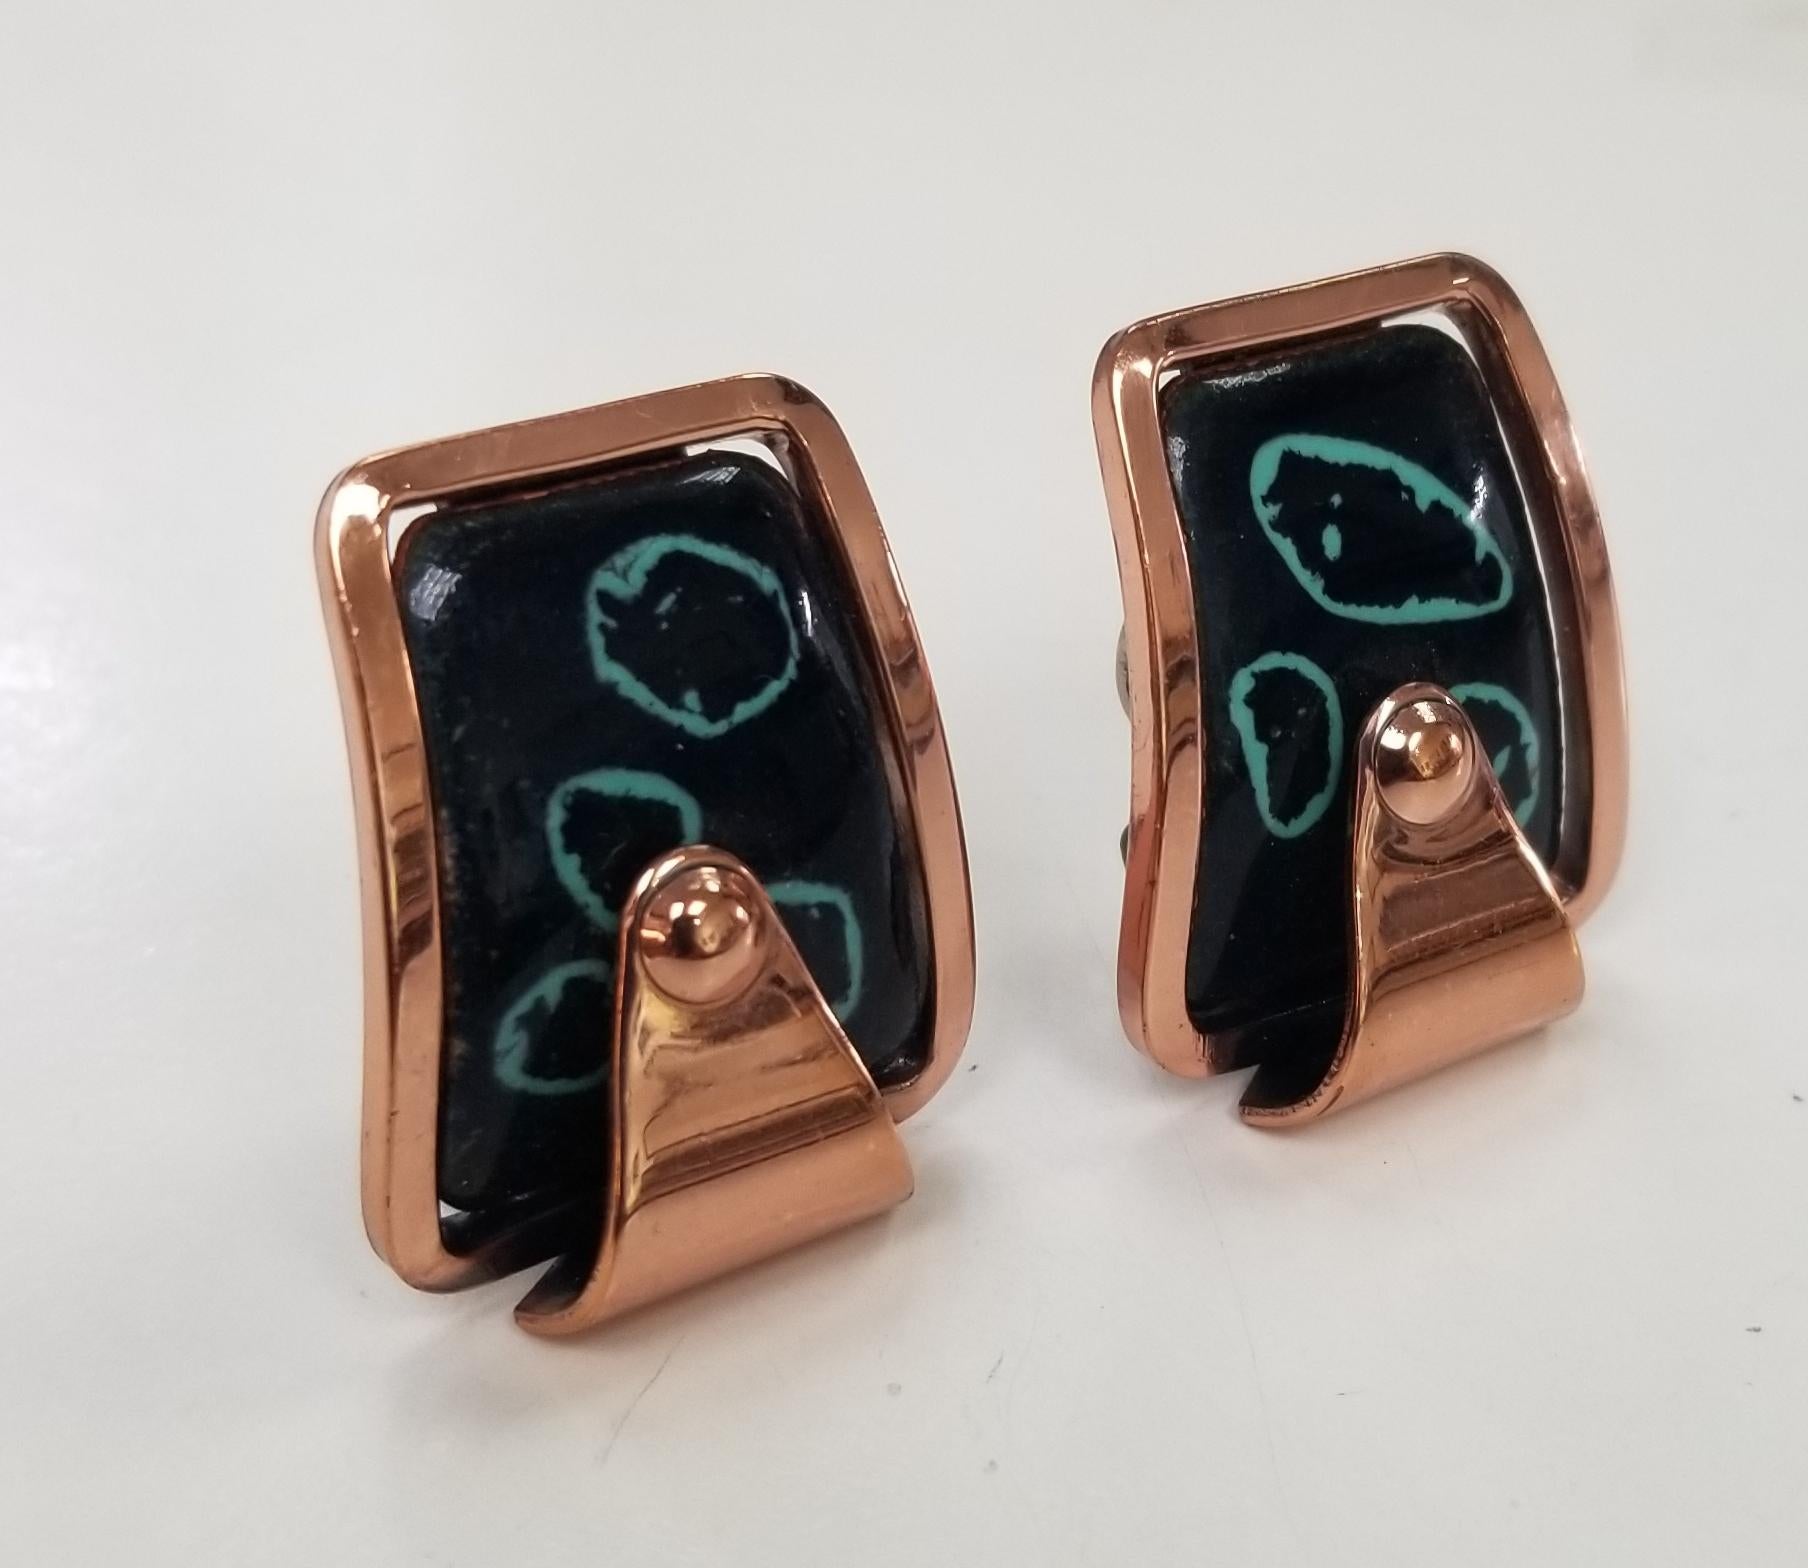 Rare vintage 1950s abstract modernist enamel on copper earrings by Matisse of California. Outstanding  design to the enamel in black and abstract design. The earrings measure 1